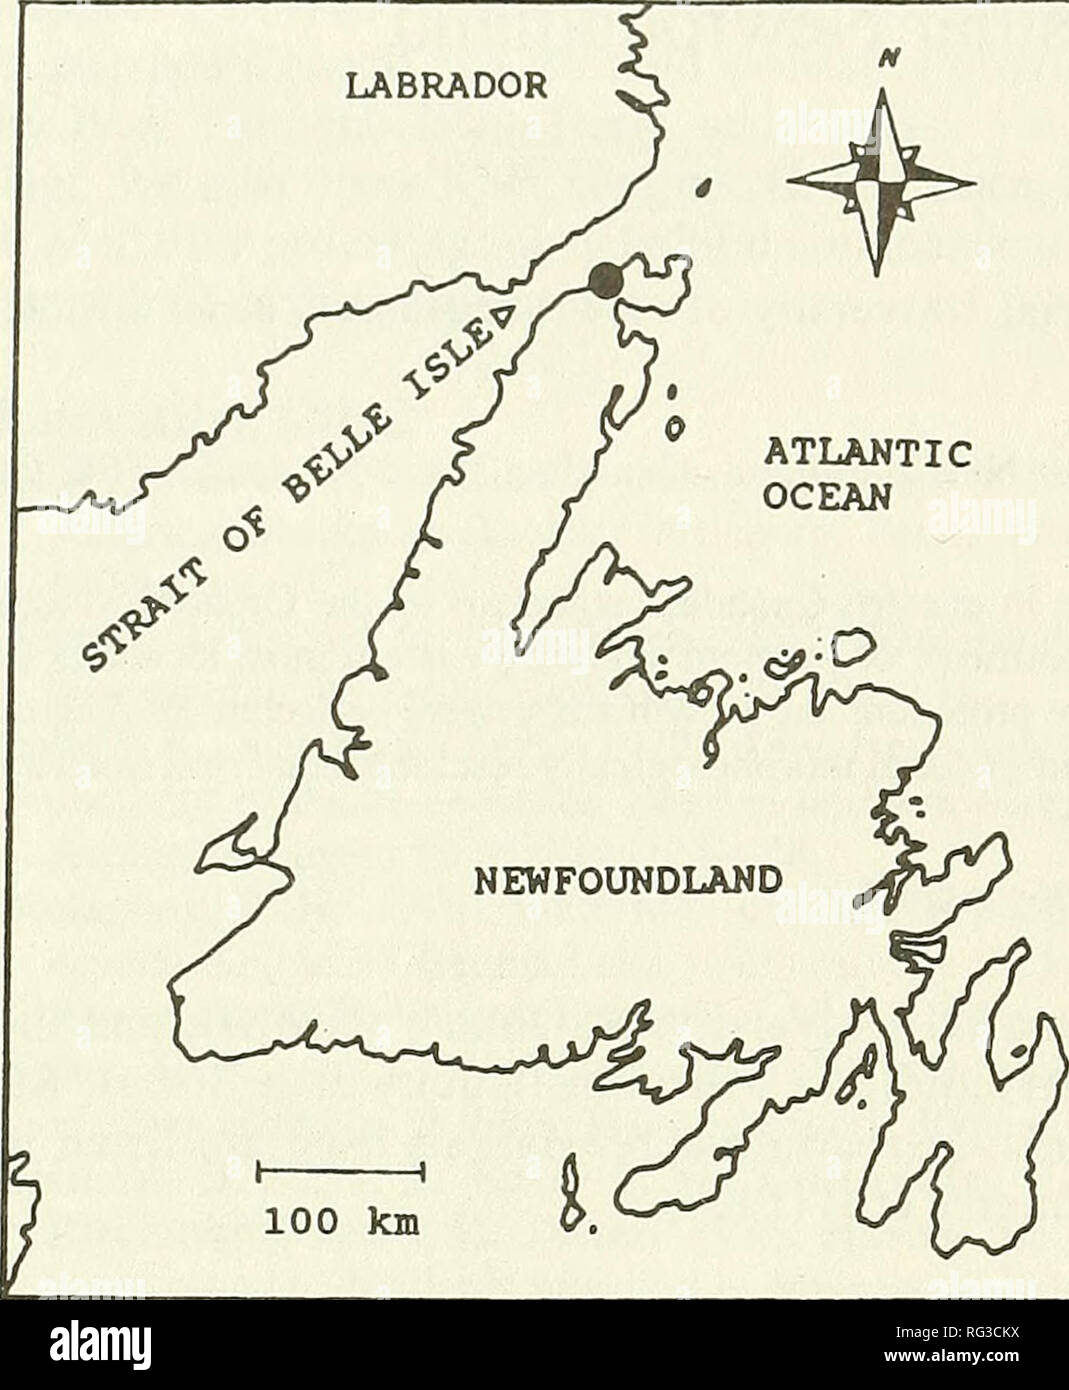 . The Canadian field-naturalist. 298 The Canadian Field-Naturalist Vol. 108 LABRADOR. Figure 1. Location of Tolypella glomerata in insular Newfoundland, Canada. have previously occurred receiving runoff and seep- age water from the inland escarpment. It is likely, however, that the macrophytes present were intro- duced since the construction period. The larger pool is approximately 200 m2 in area whereas the smaller pool 100 m to the northeast is only one-third this size. Maximum water depth which measured 25 cm fluctuated somewhat during the summer, but never dropped drastically and the pools Stock Photo